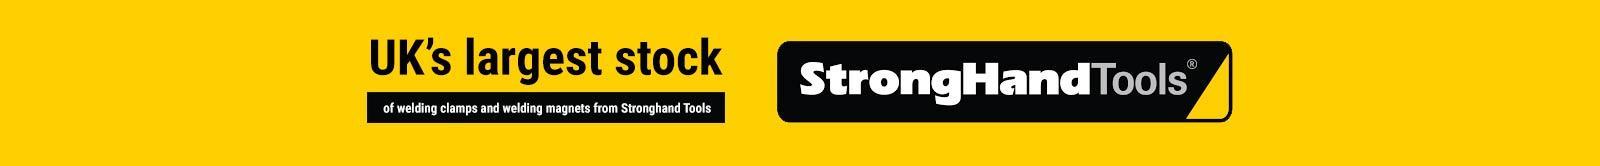 UK’s largest stock of welding clamps and welding magnets from Stronghand Tools